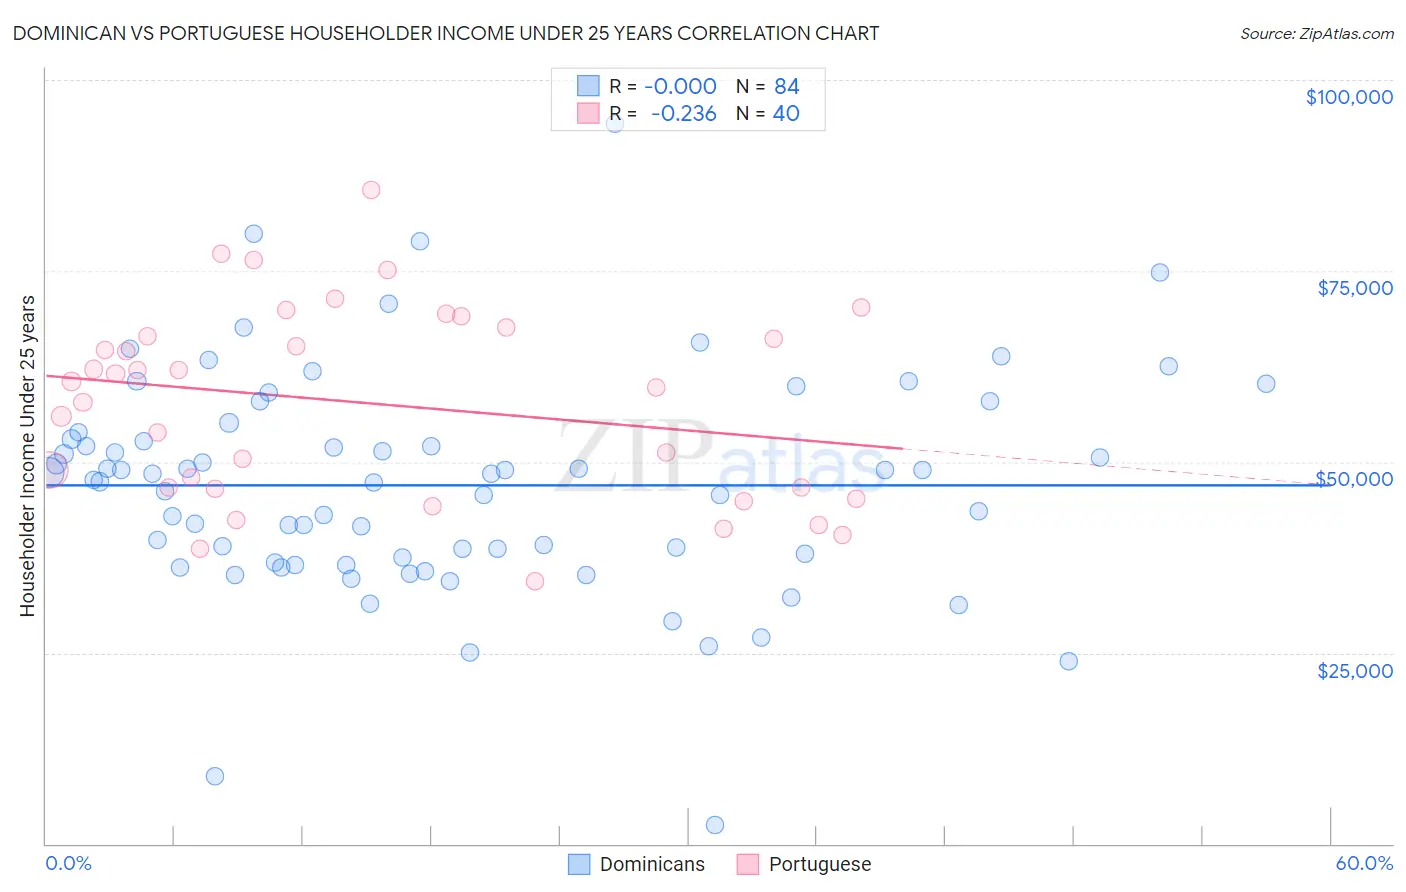 Dominican vs Portuguese Householder Income Under 25 years